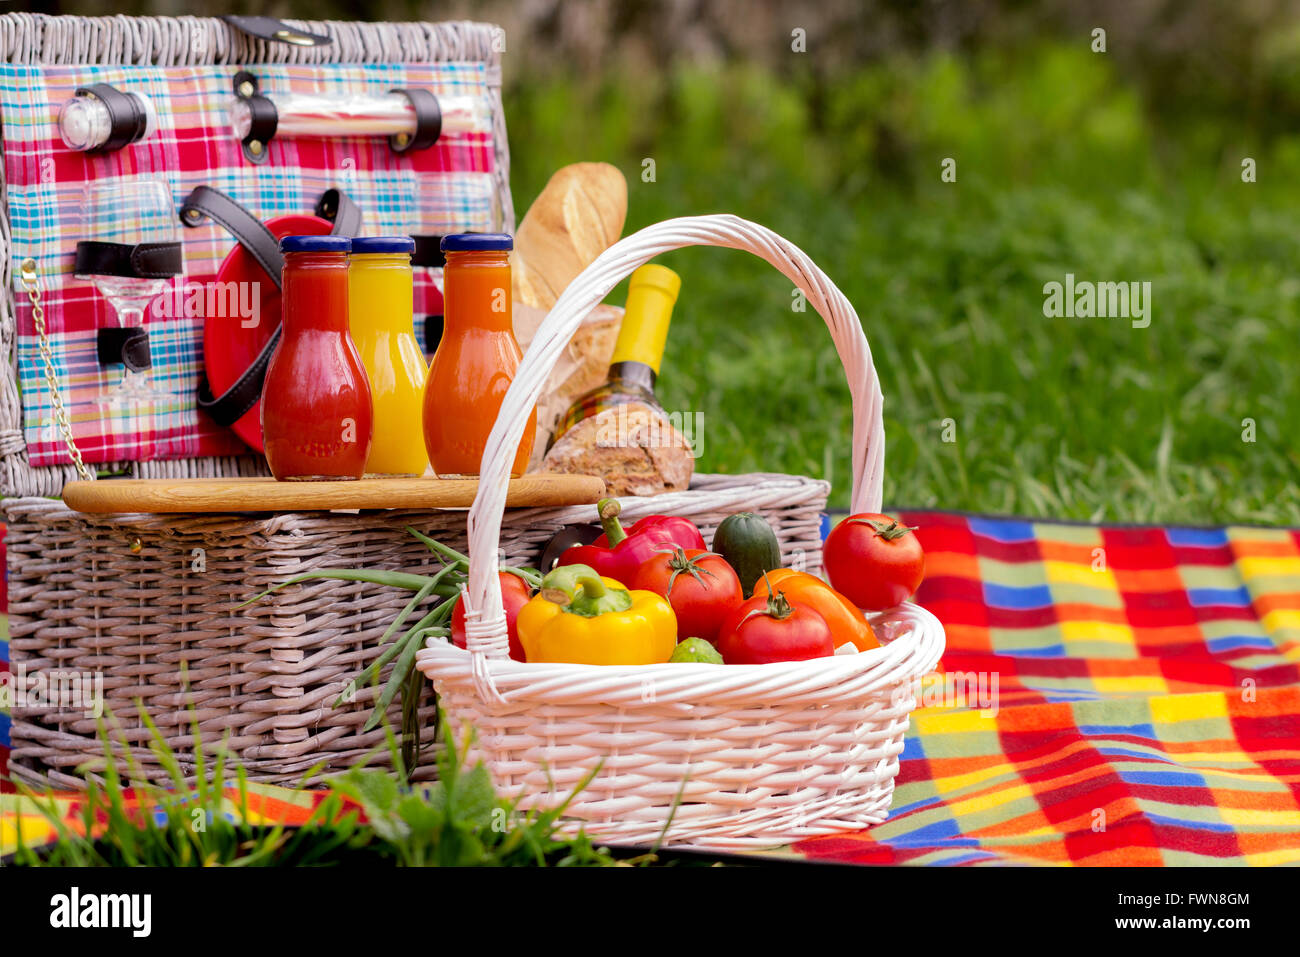 Picnic on the grass. Picnic basket with vegetables and bread. A bottle of wine and bottles of juice. Stock Photo